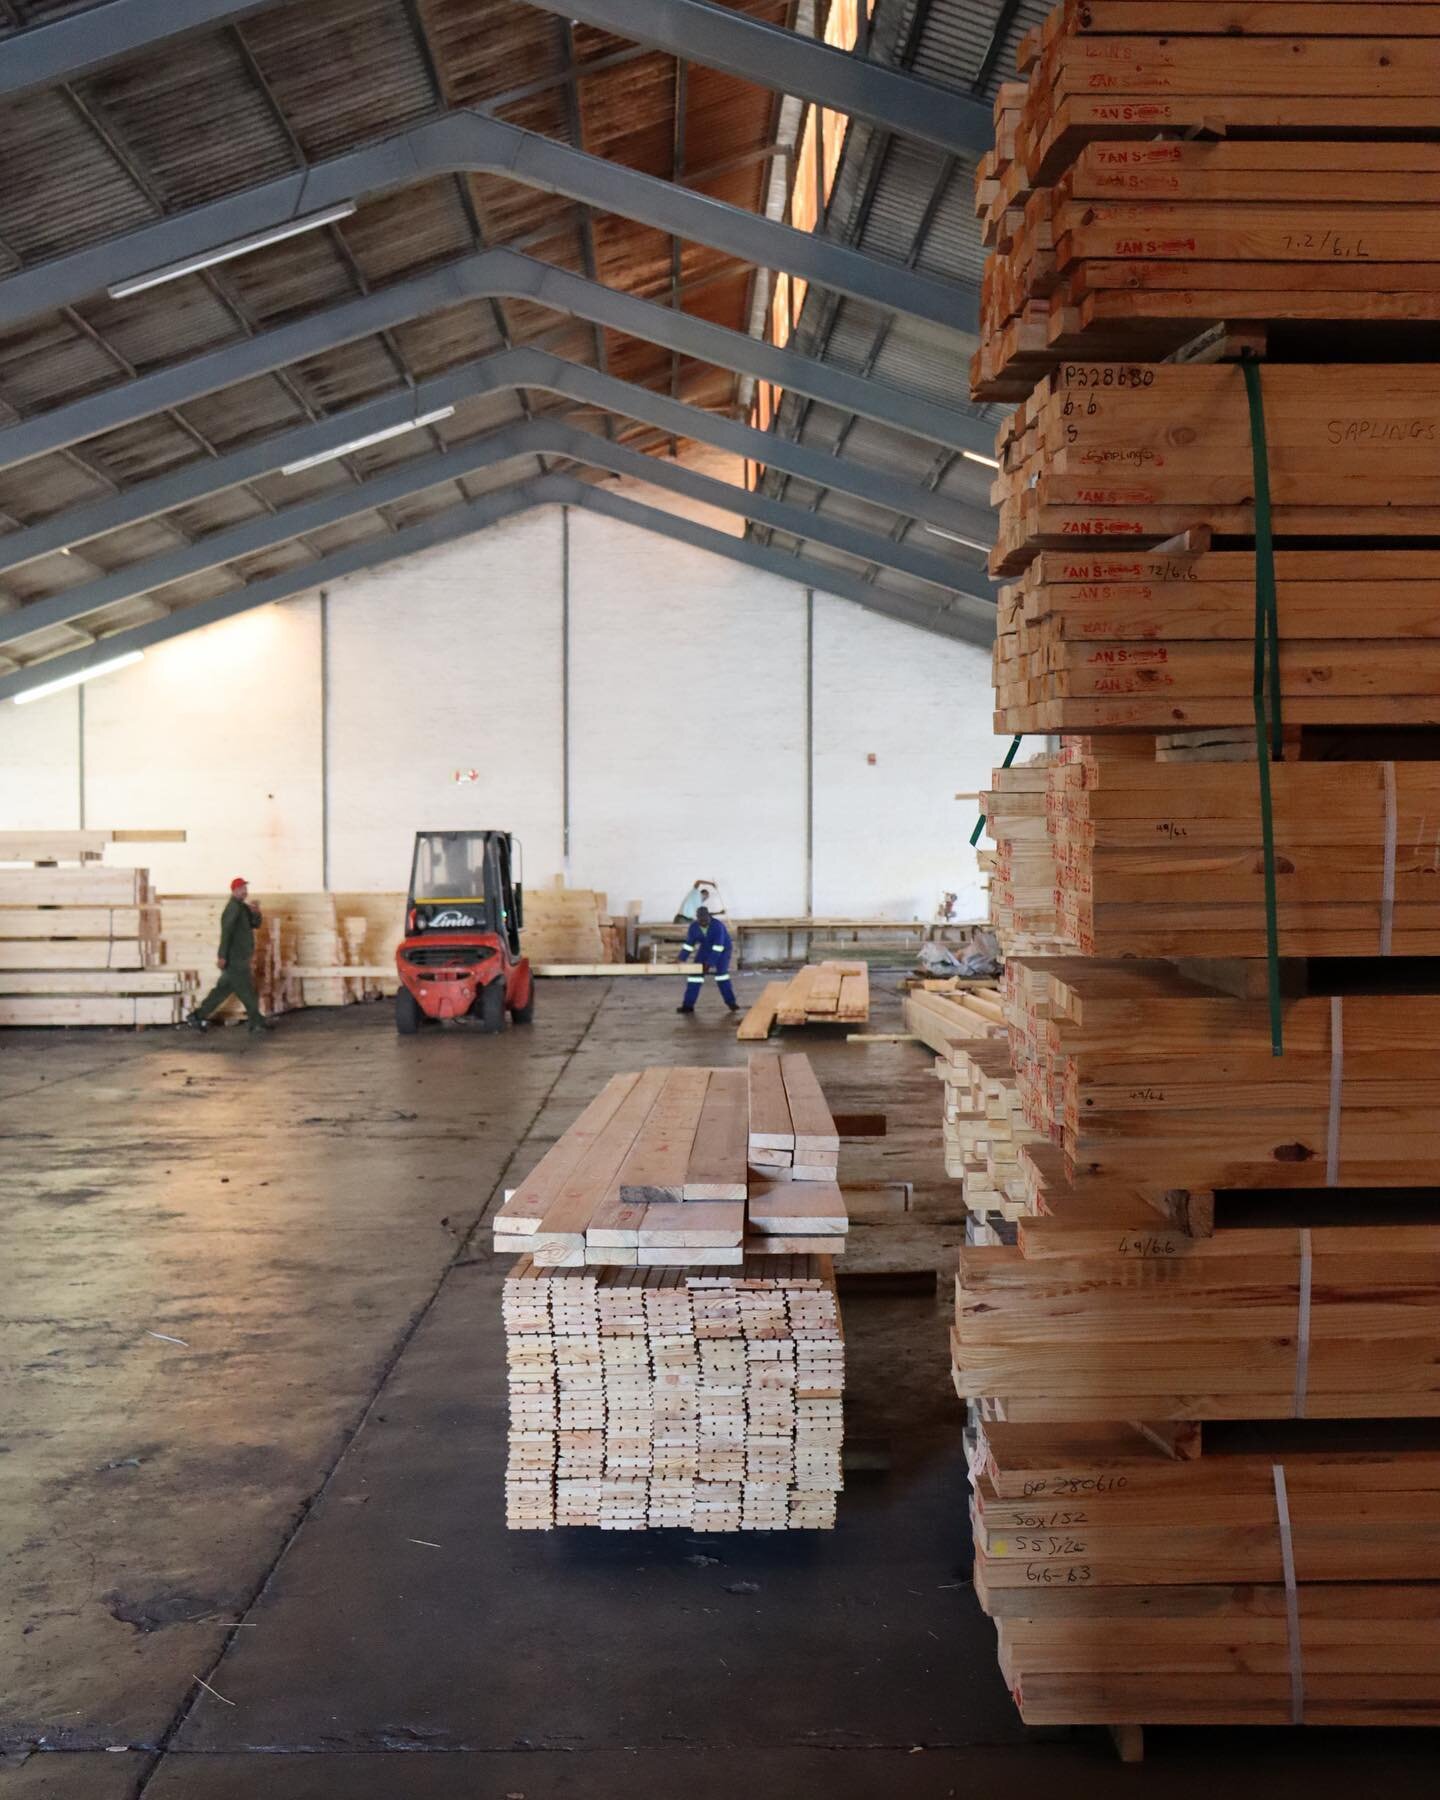 The Saplings Timber Store 📍

Where your wholesale S.A. Pine orders are stored and loaded onto our trucks for delivery.

www.saplings.co.za 
_

#pine #timber #timberindustry #contruction #furnituremanufacturer #capetown